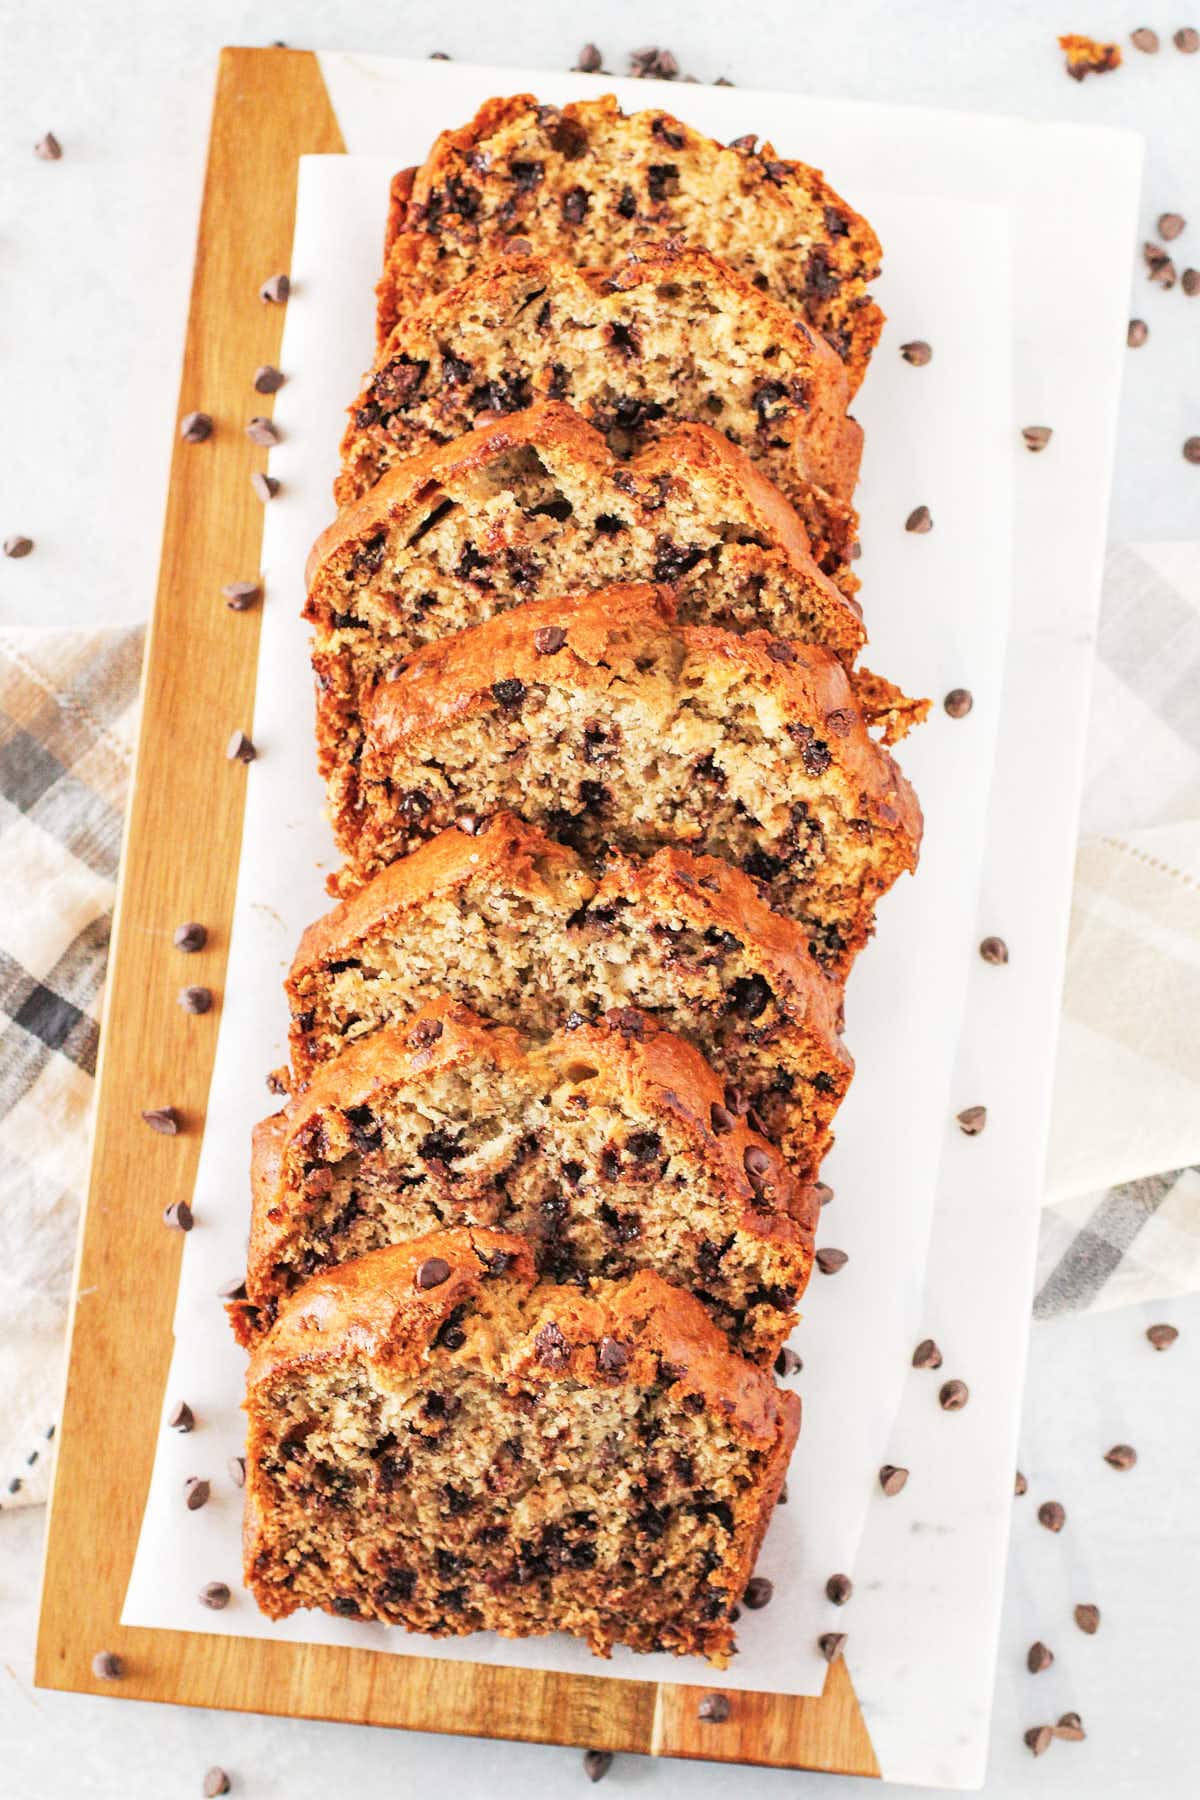 Sliced Chocolate Chip Banana Bread on a serving platter.